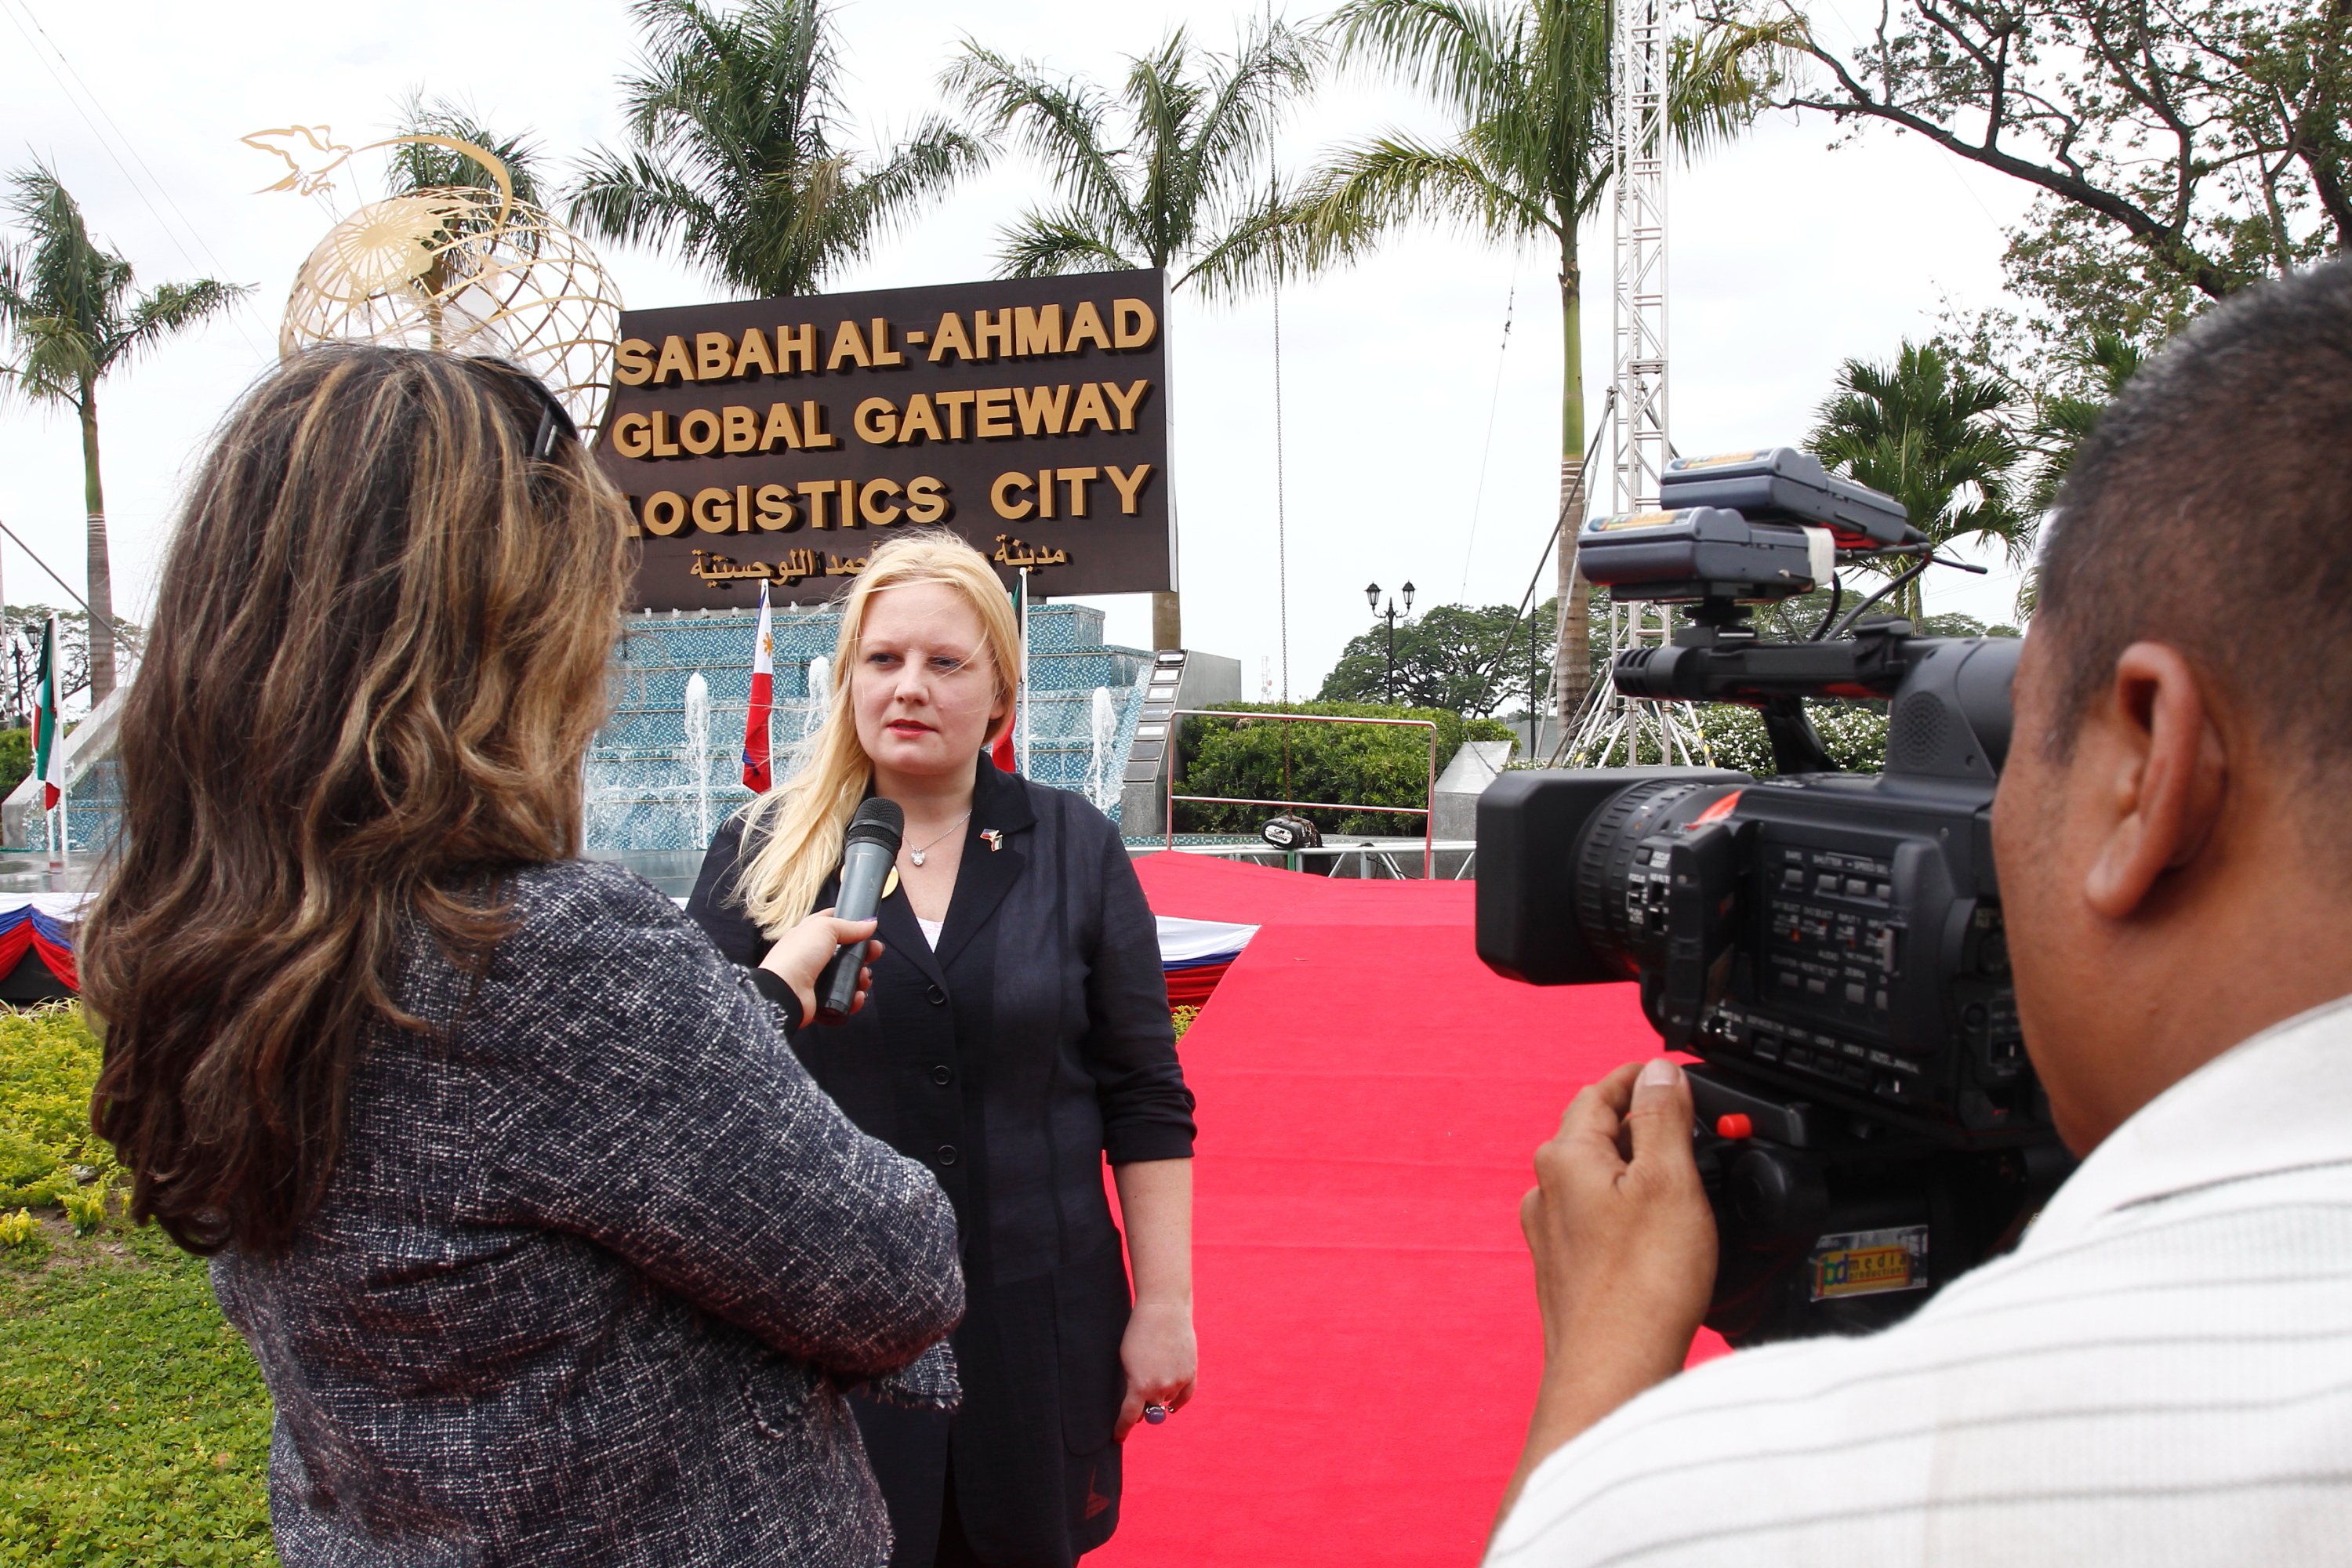 Investor Marsha Lazareva, a Russian national, is interviewed at the groundbreaking of the Sabah al Ahmad Global Gateway Logistics City in the Philippines in 2012. Courtesy KGL Investment